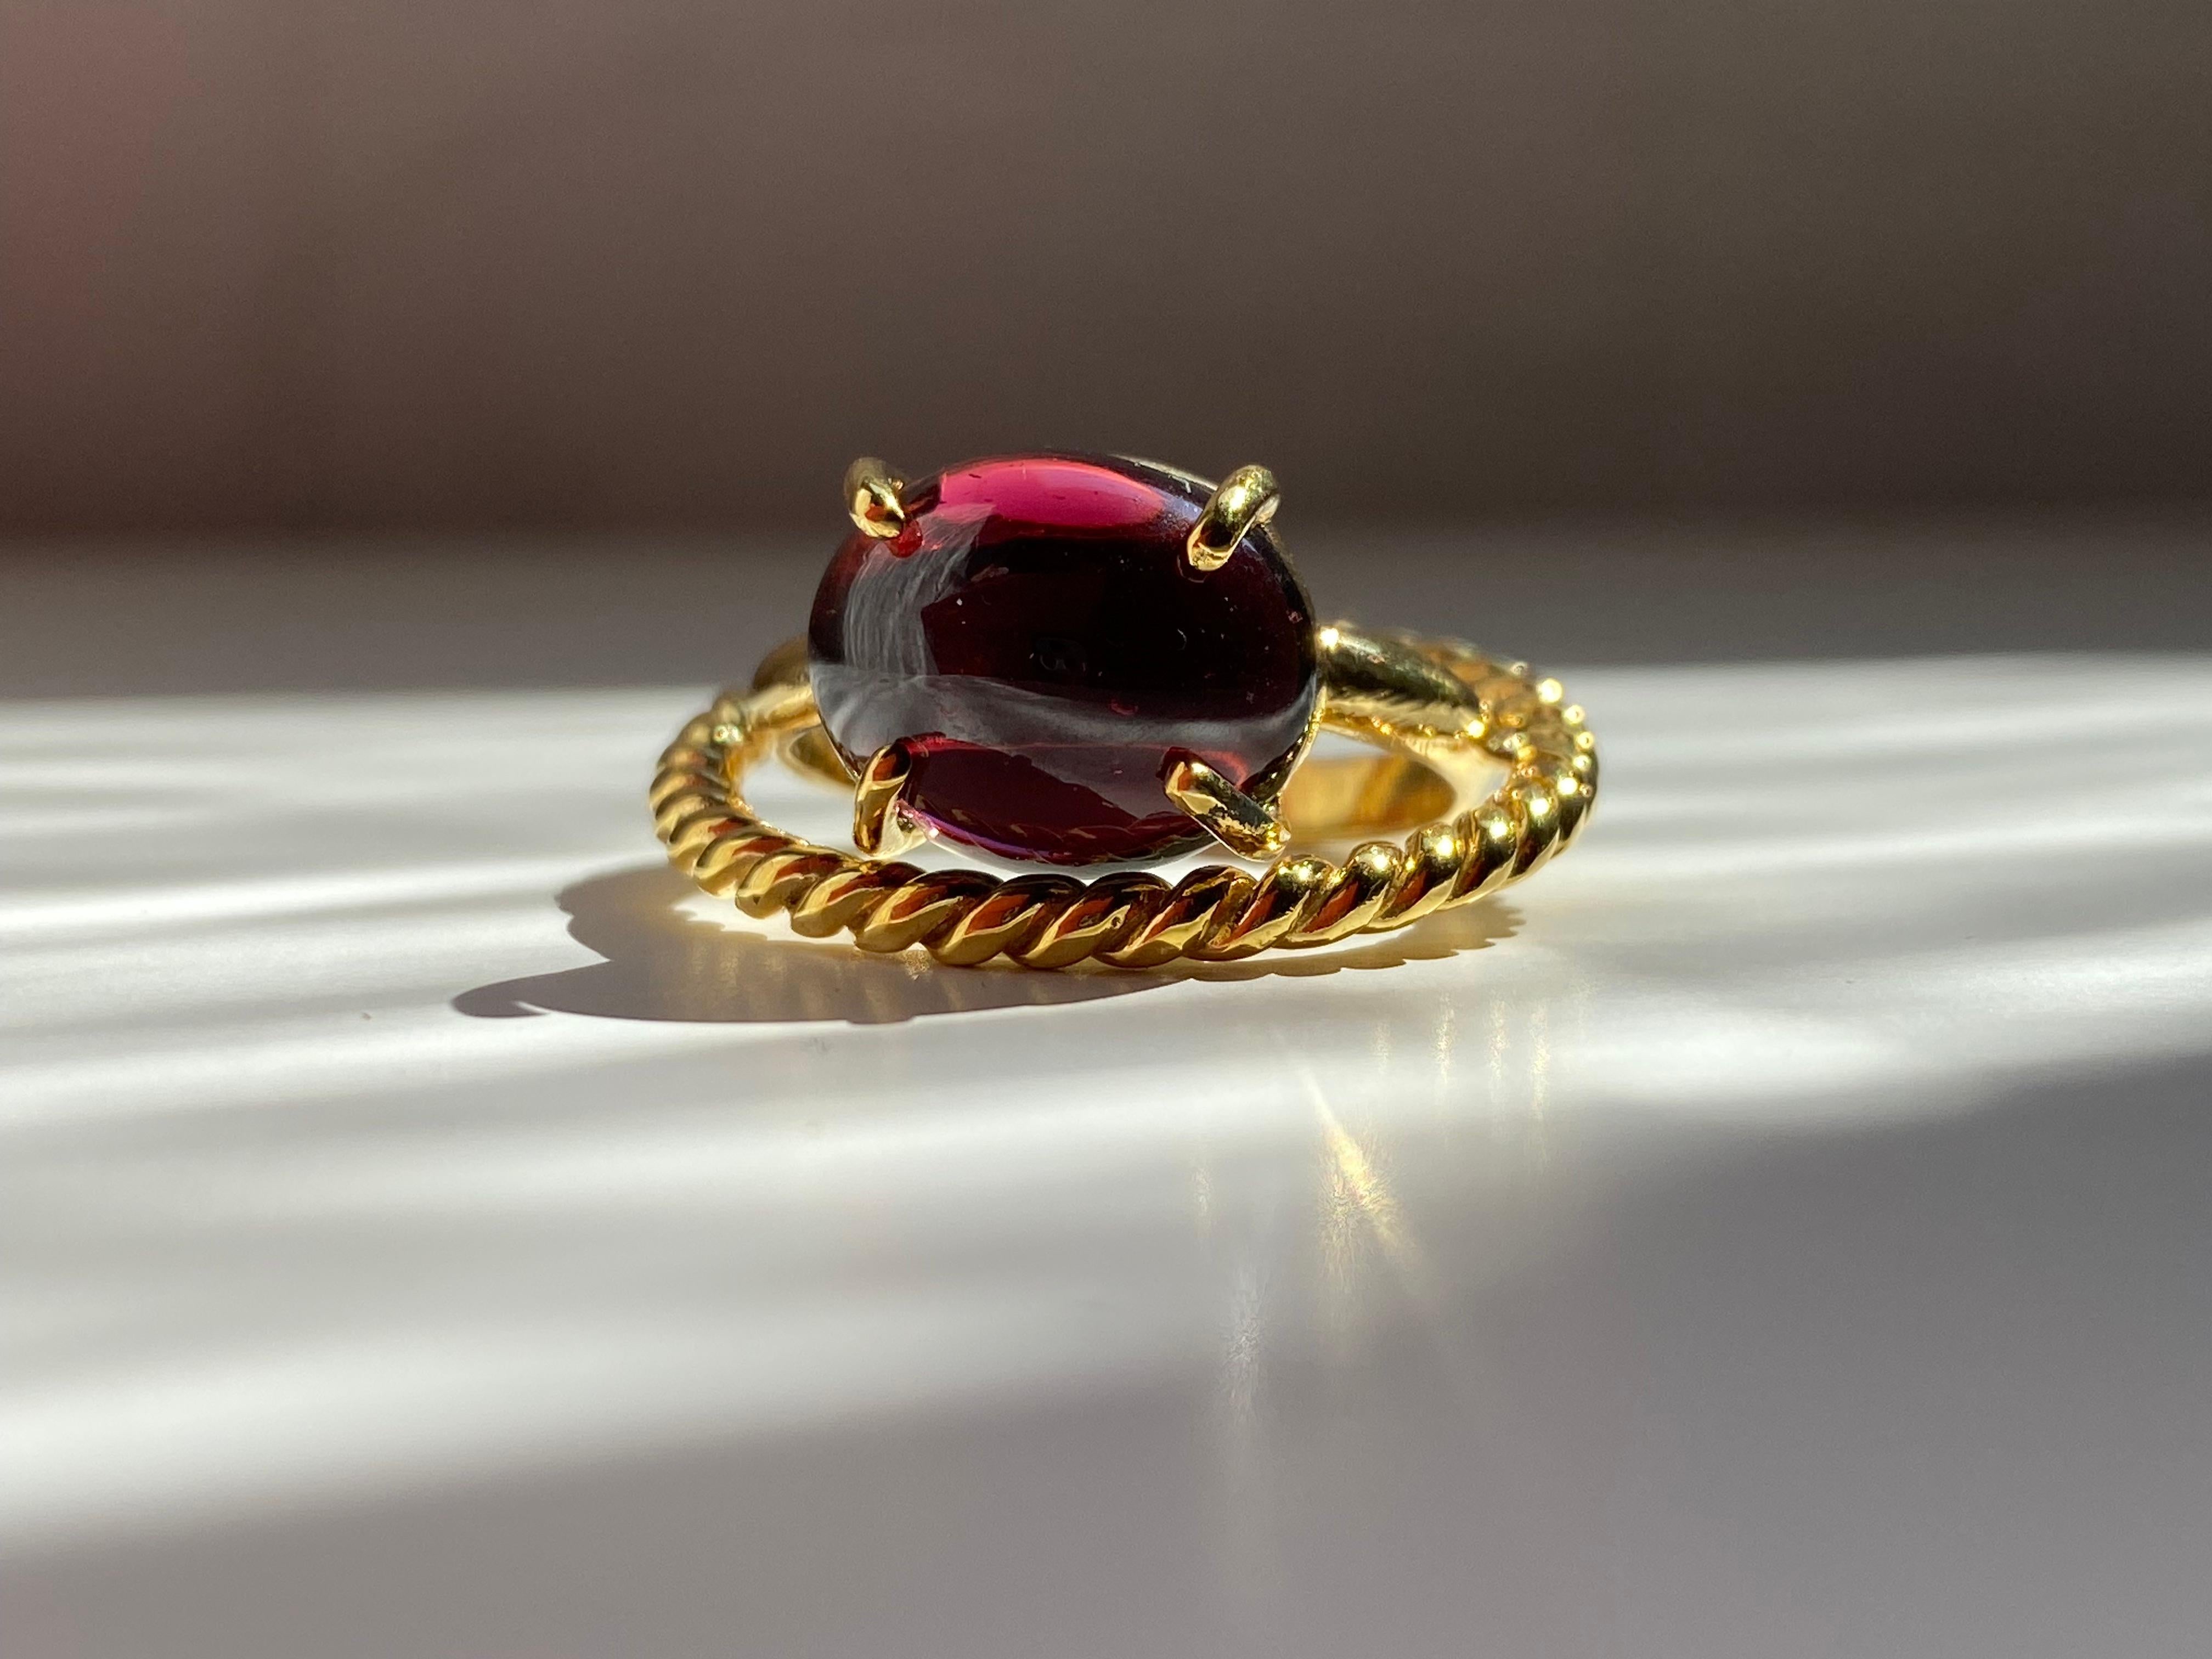 Rossella Ugolini Design Collection, Garnet ring  handcrafted with two strips intertwined together in 18 karats Yellow Gold. A Modern style design ring with an oval cabochon Garnet.
Inspired by the union of two loves that twist together in a single